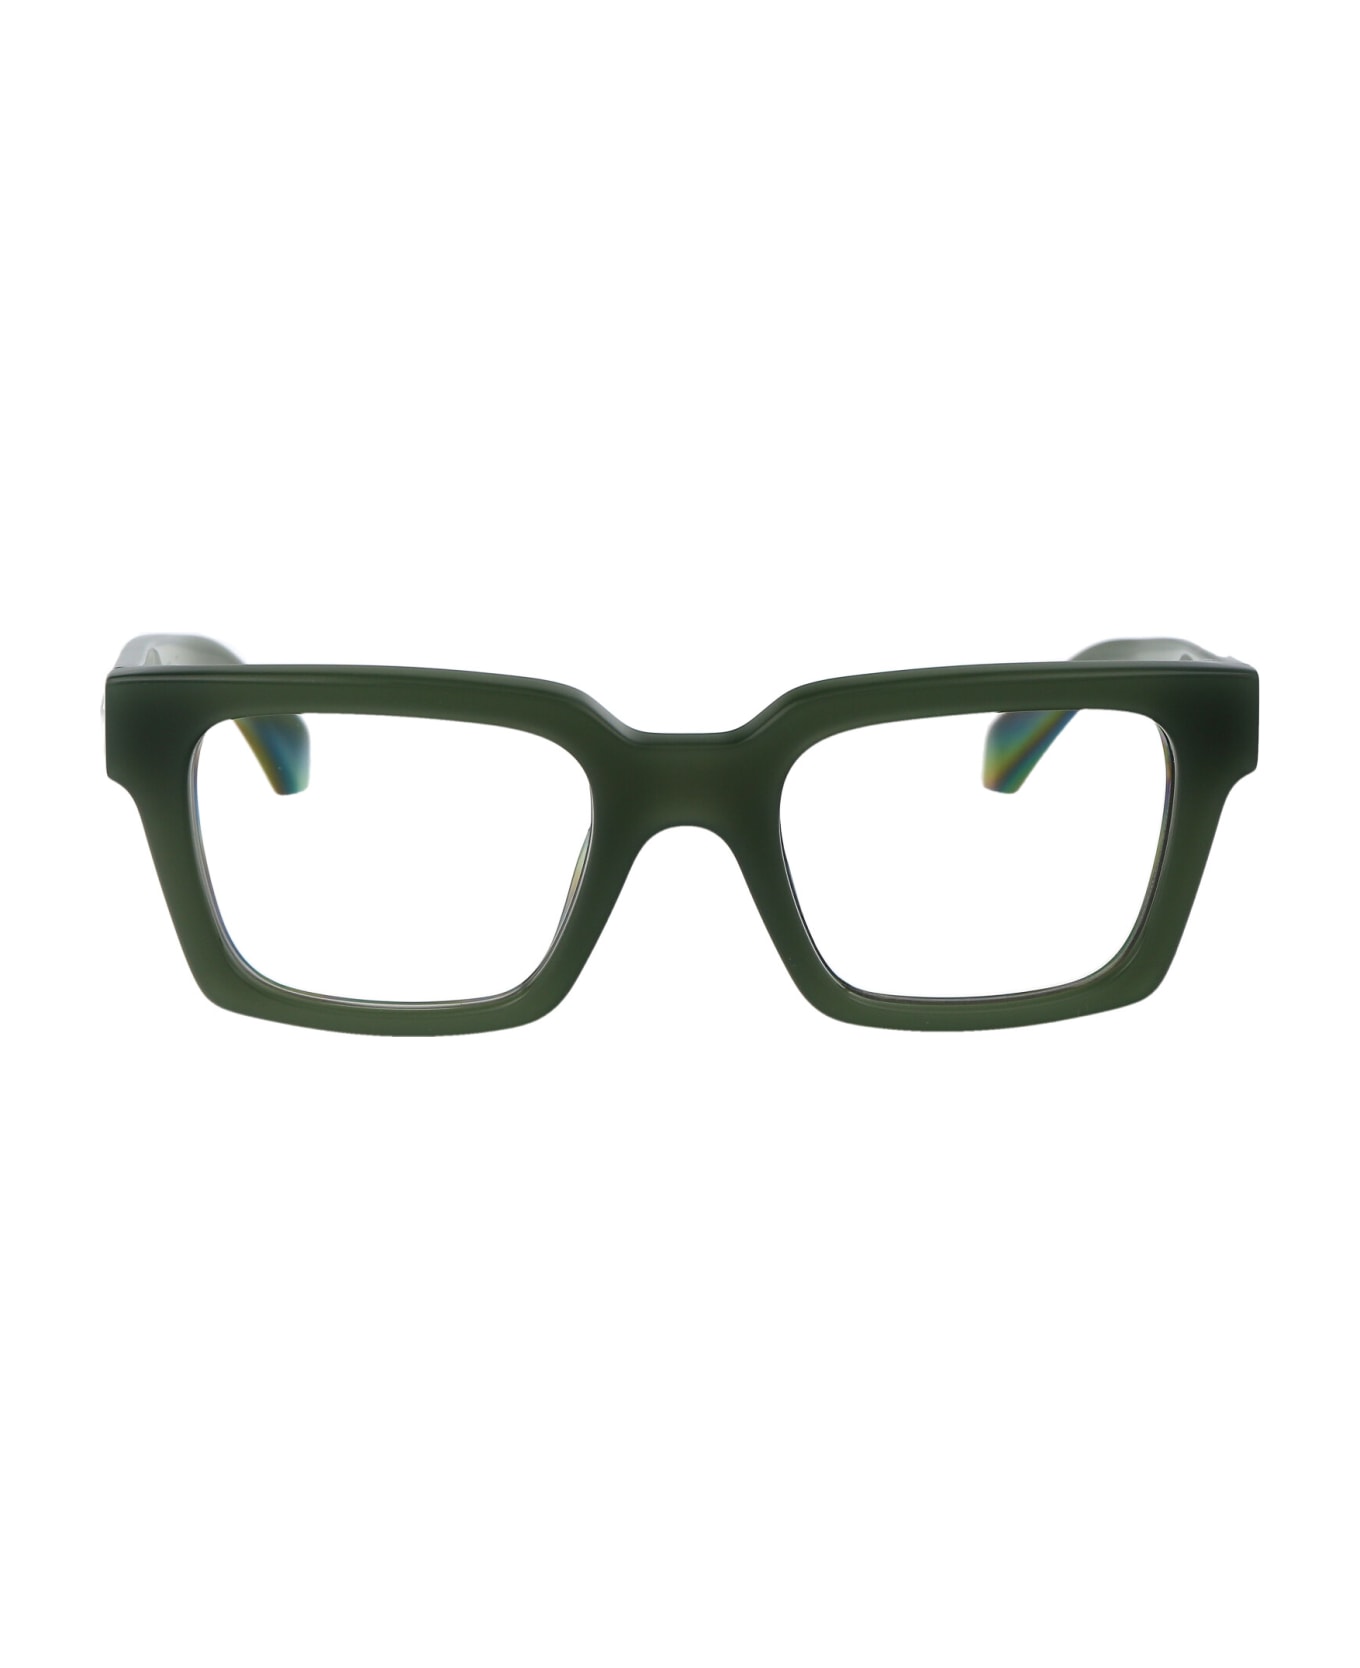 Off-White Optical Style 72 Glasses - 5900 SAGE GREEN